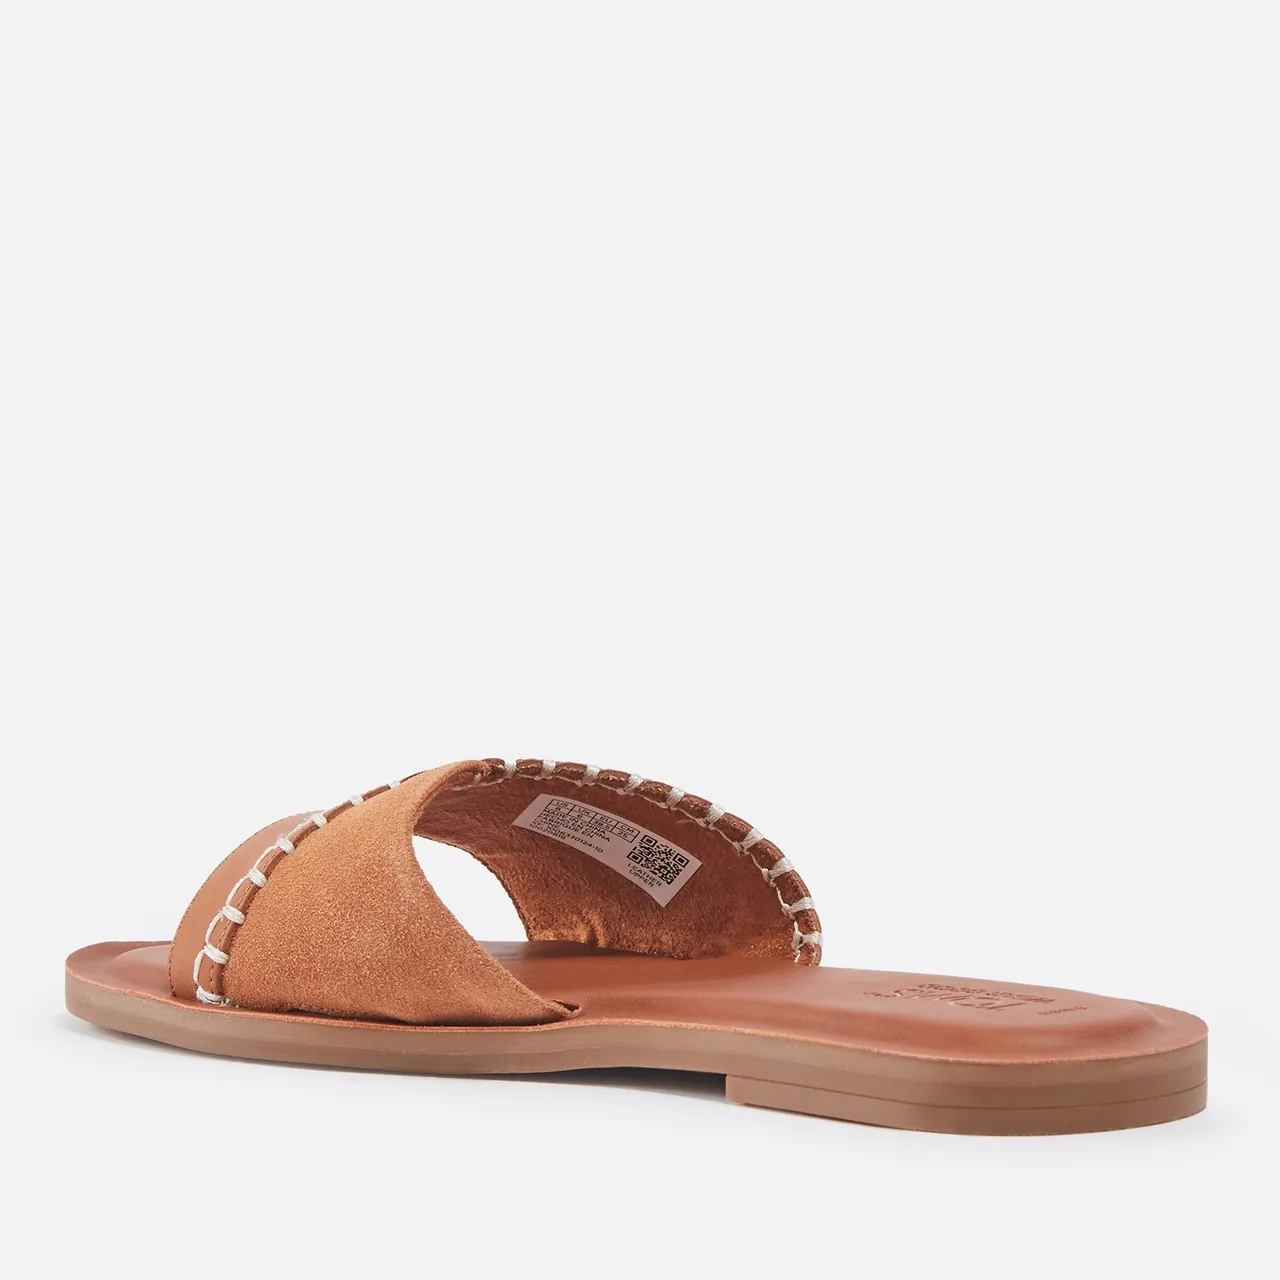 TOMS Women's Shea Leather and Suede Sandals - UK